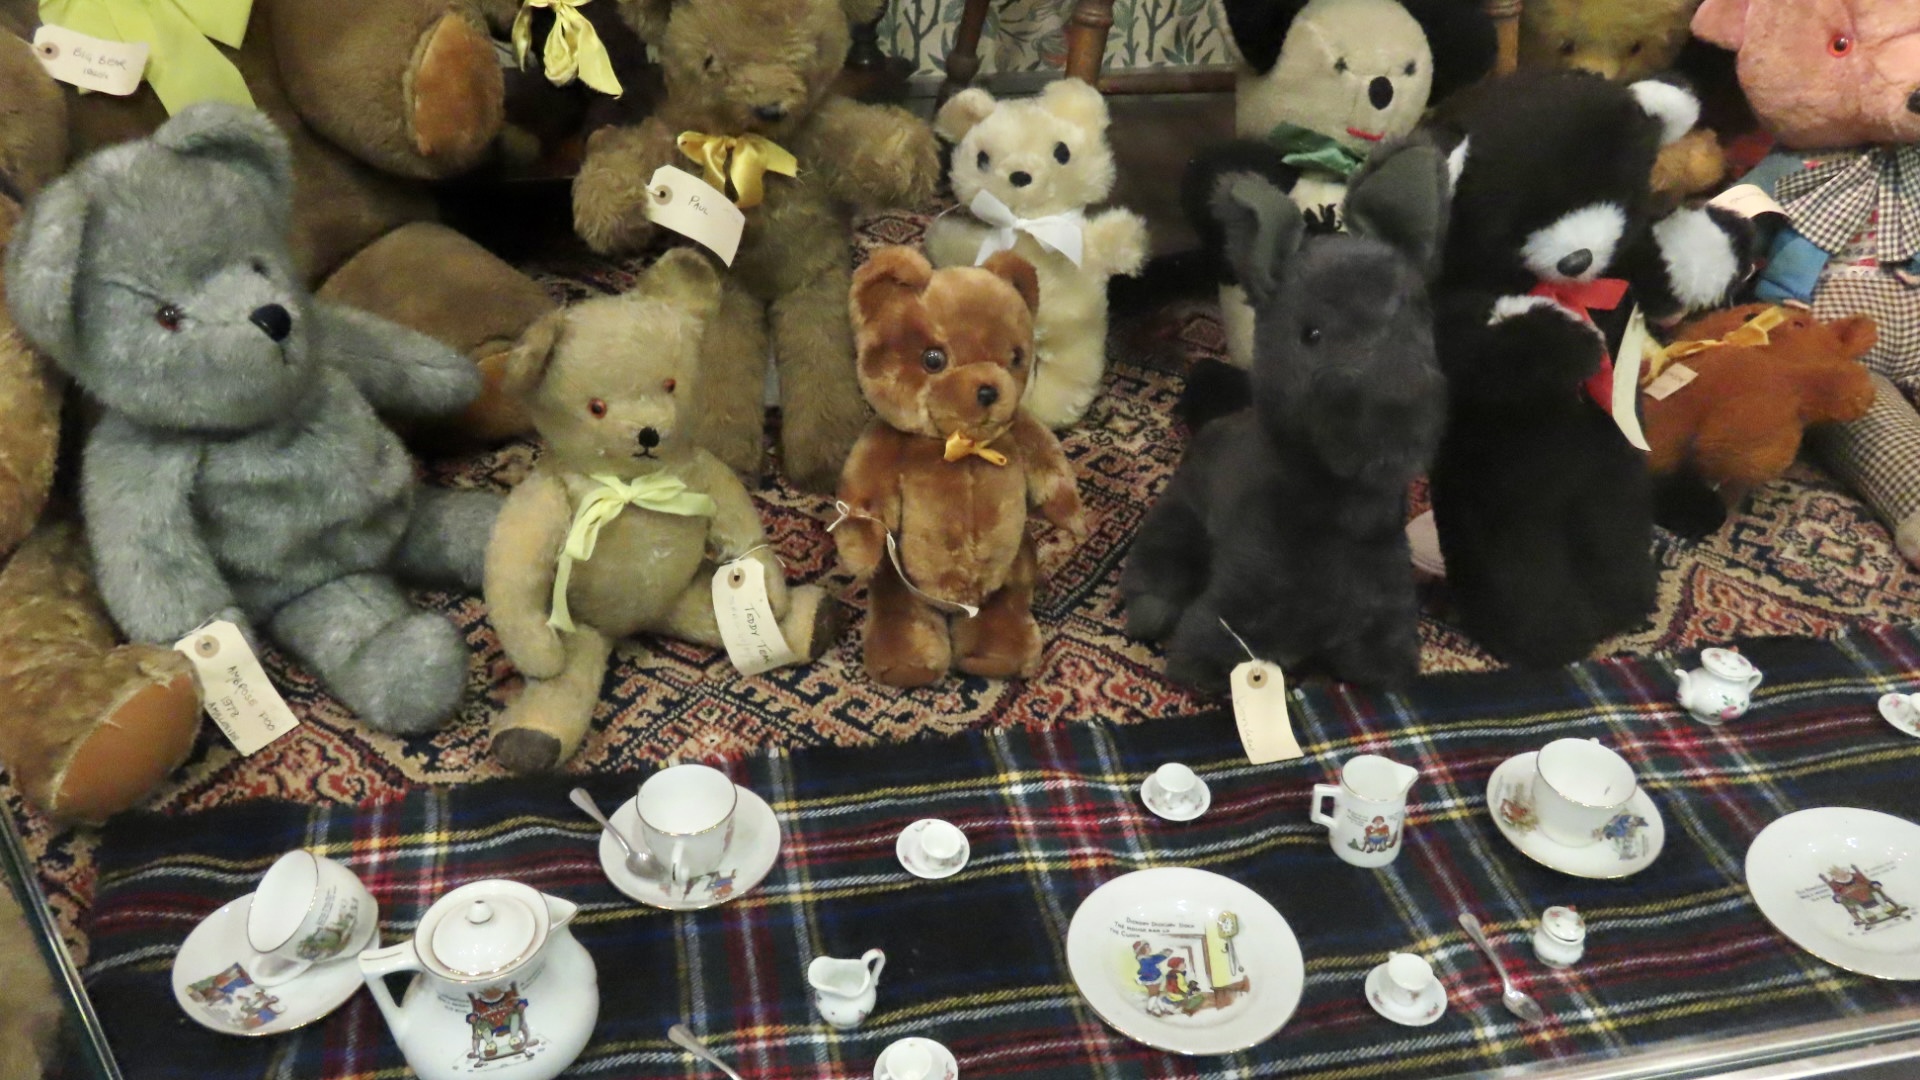 People are invited to adopt a teddy from the museum collection at The Atkinson in Southport to support the charitable work of The Atkinson Development Trust. Photo by Andrew Brown Stand Up For Southport 